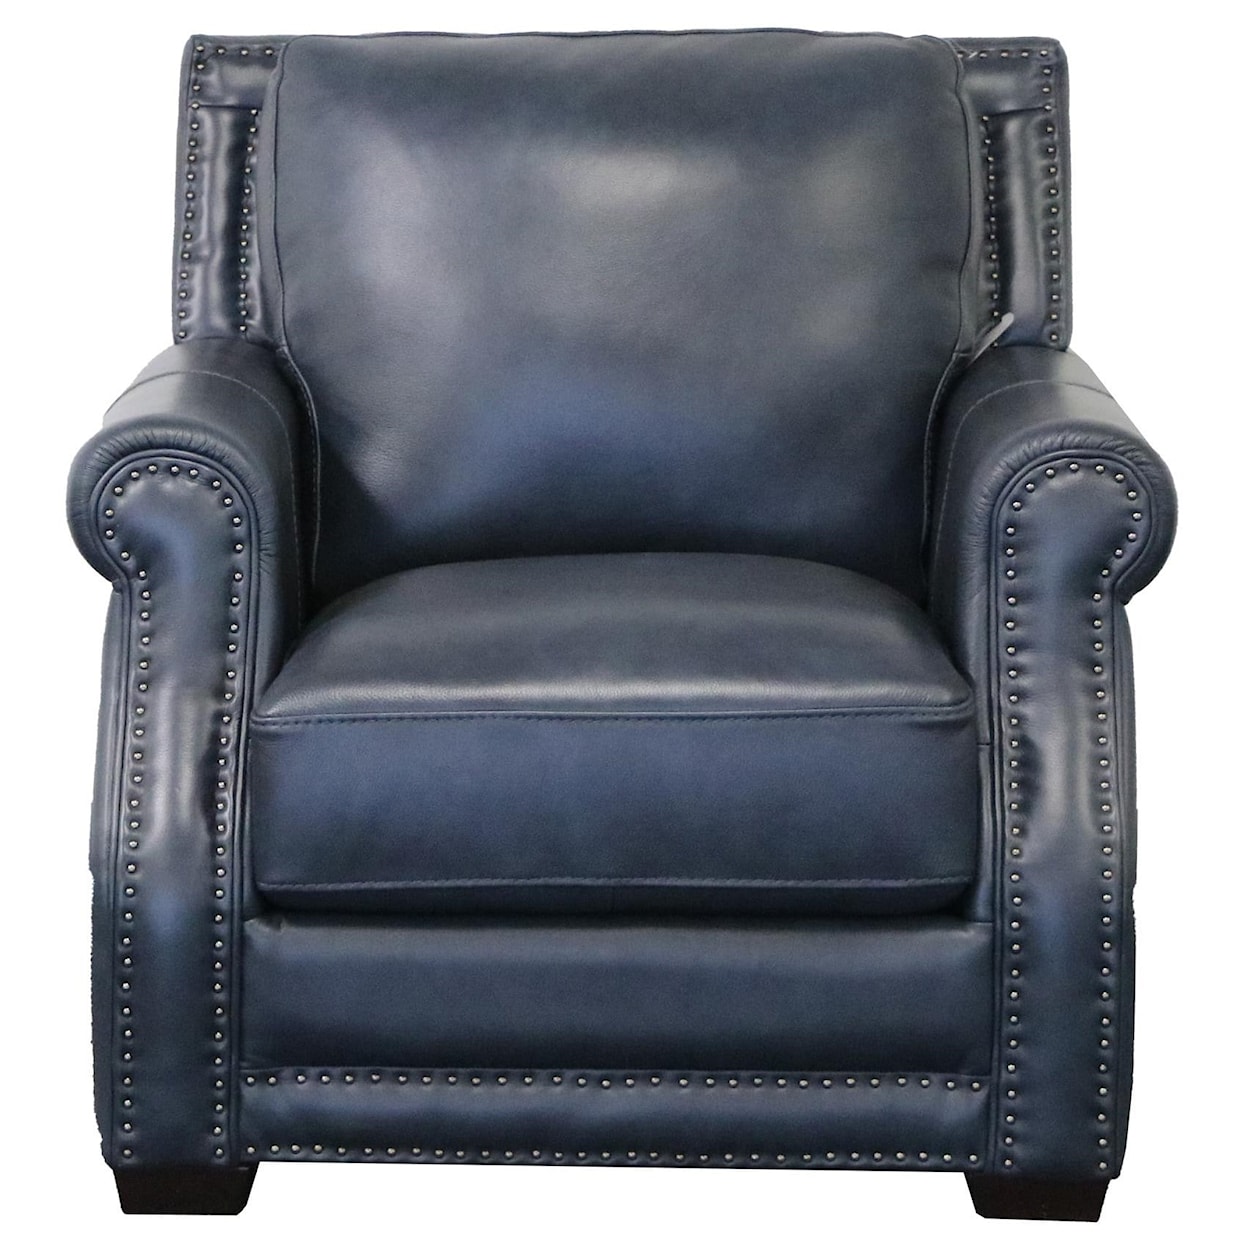 Futura Leather Delta Blue Leather Chair